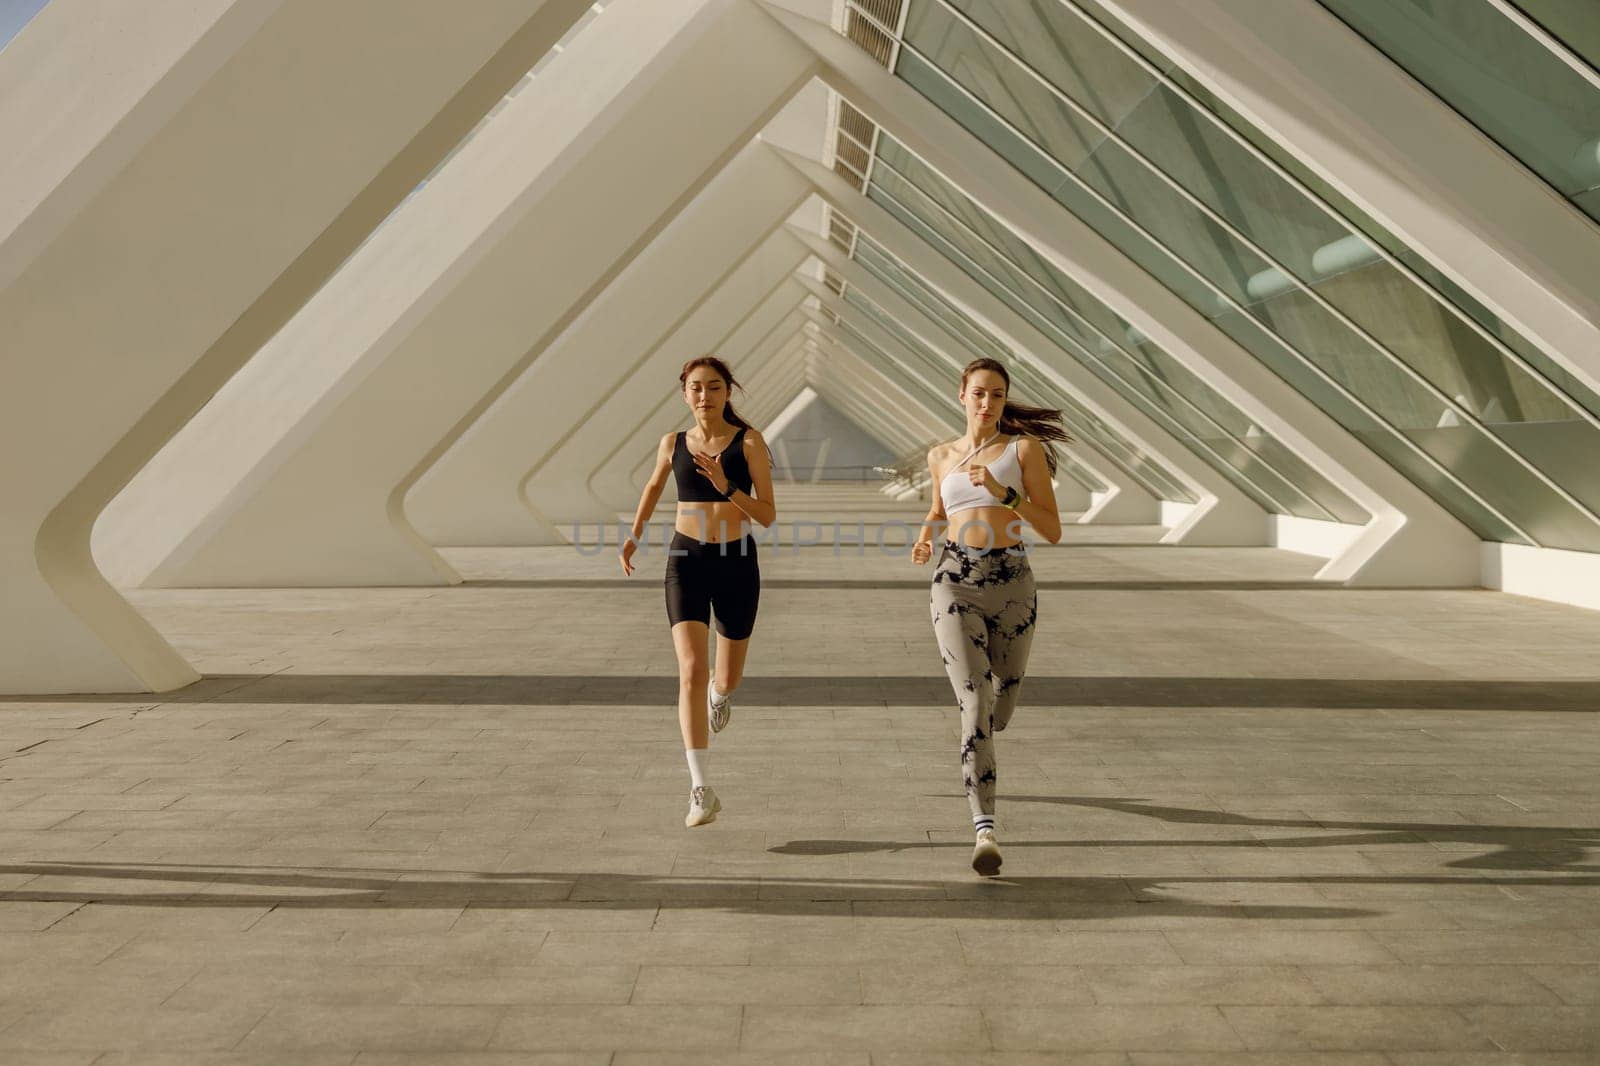 Two athletic women in sportswear is jogging around the city in early morning. Reaching the goal